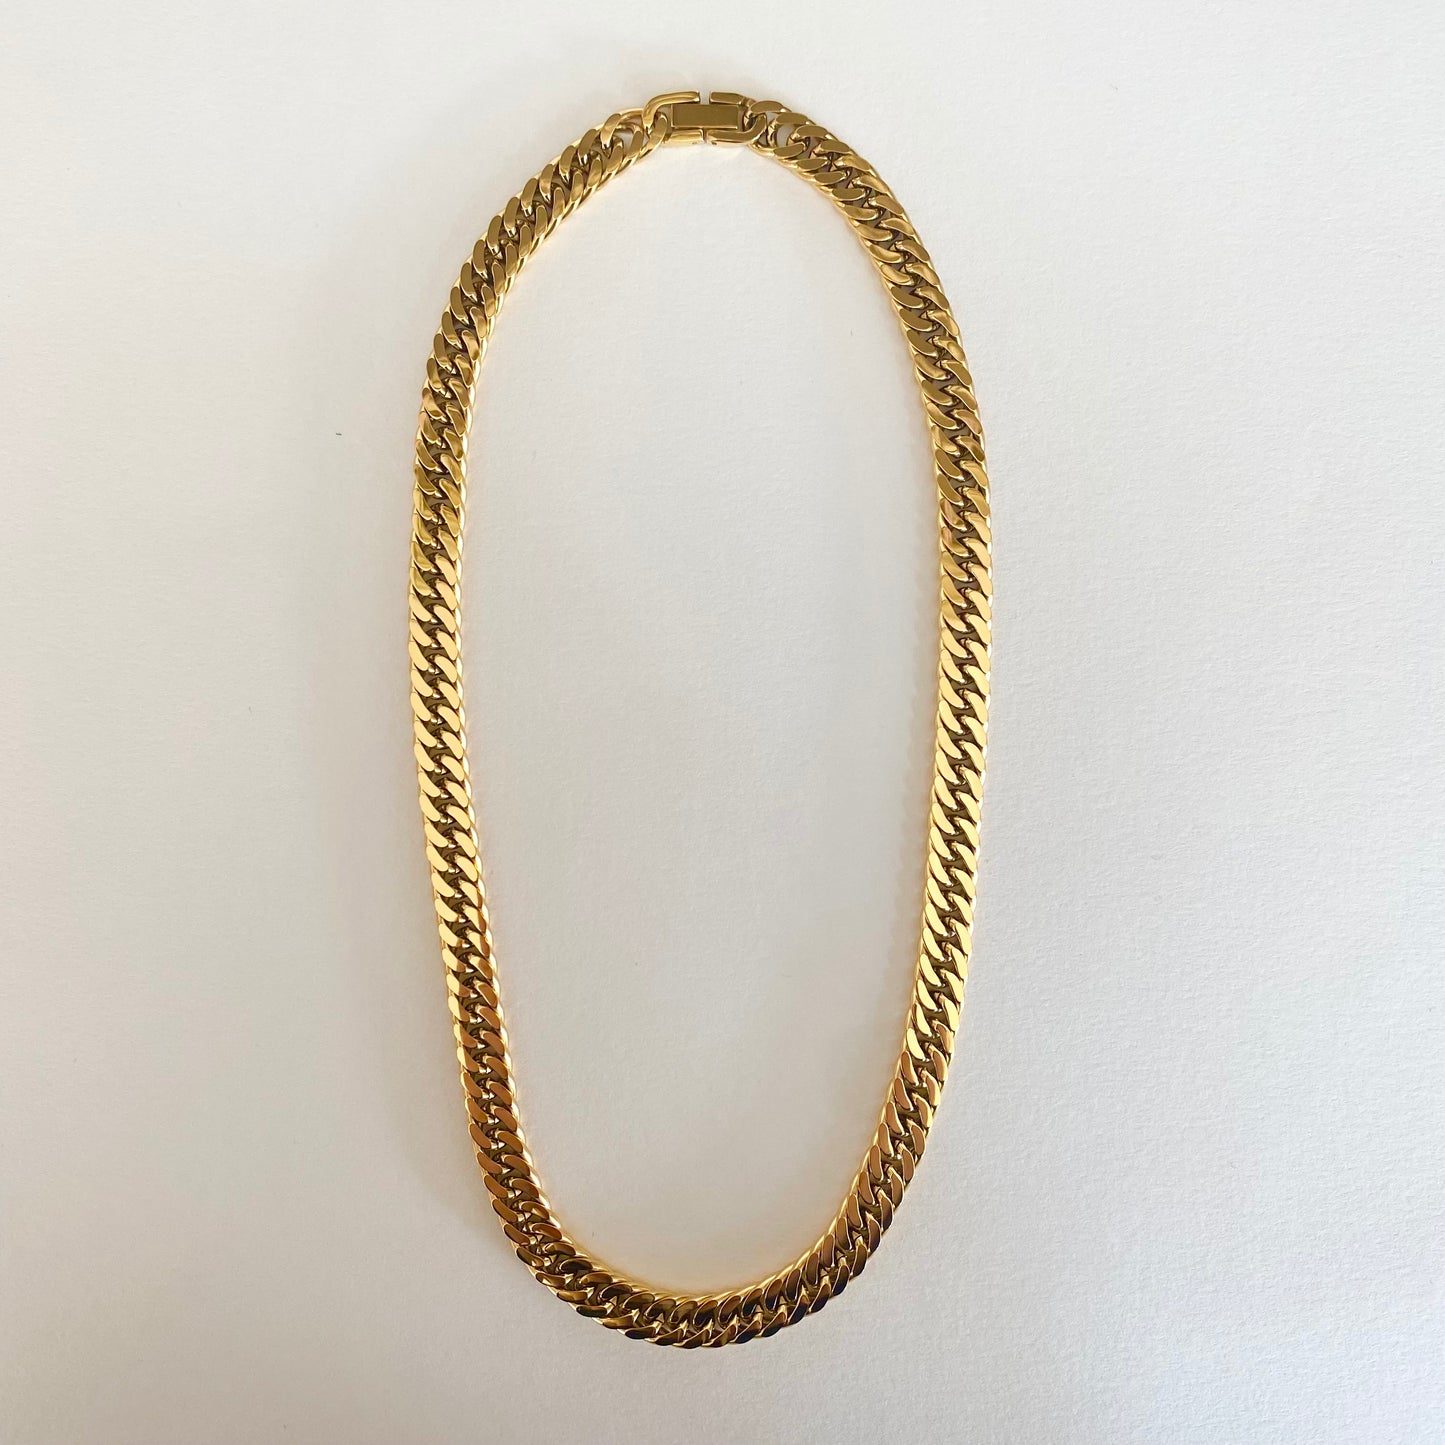 Freder Chain Necklace